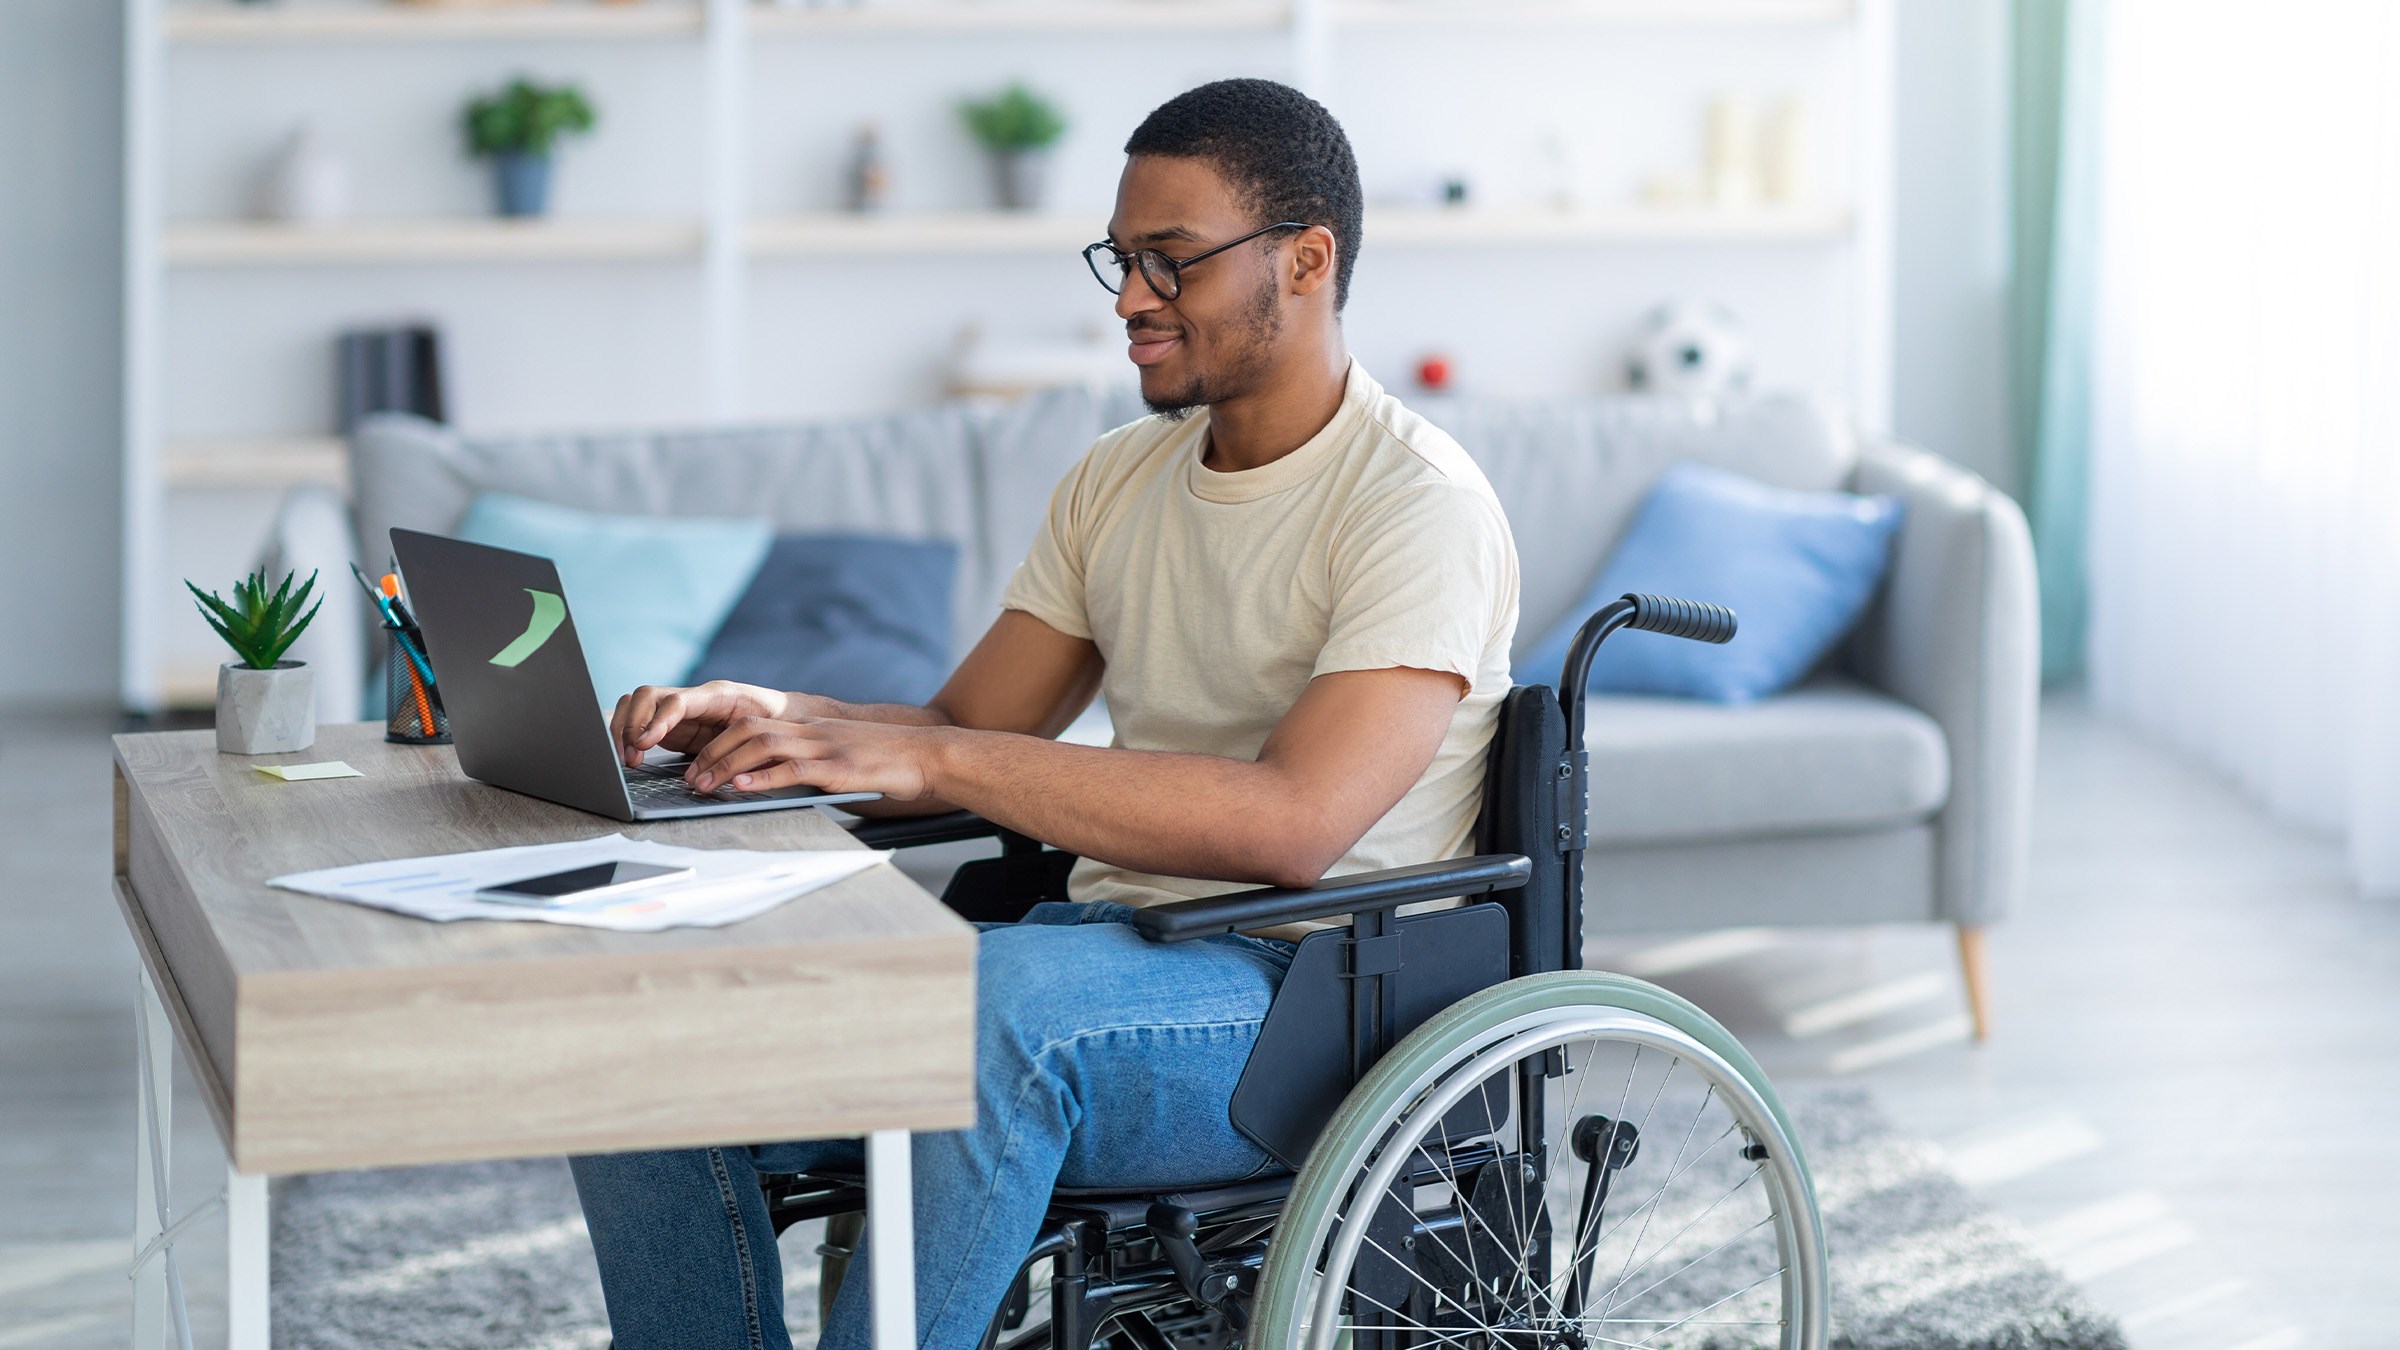 A young Black man sits in his wheelchair in a clean and well appointed apartment working on something on his laptop.